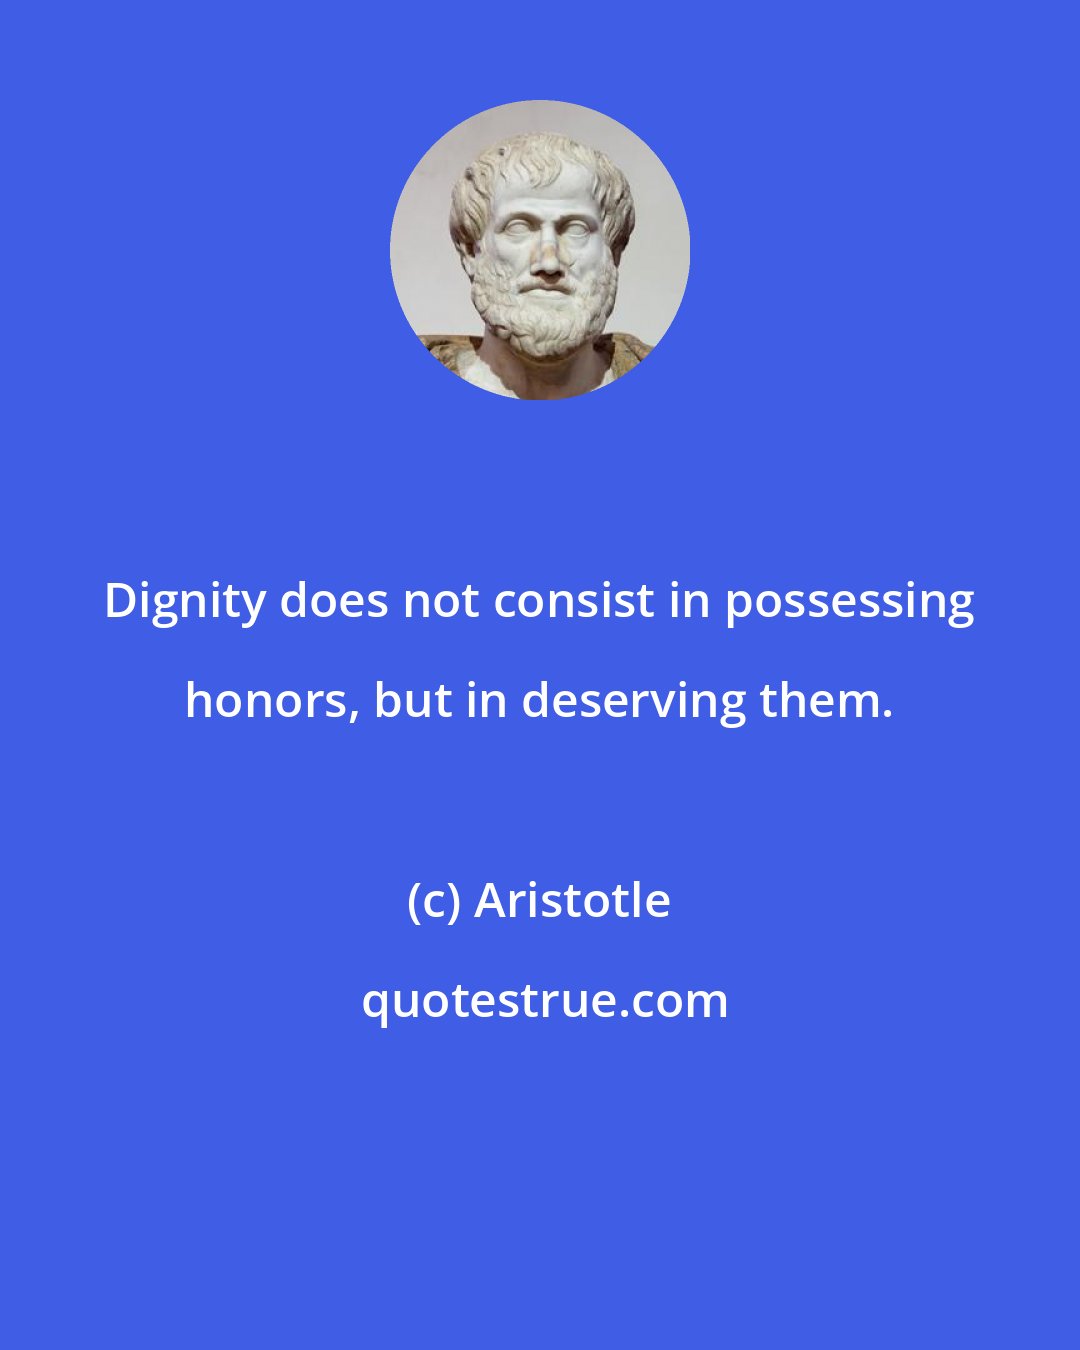 Aristotle: Dignity does not consist in possessing honors, but in deserving them.